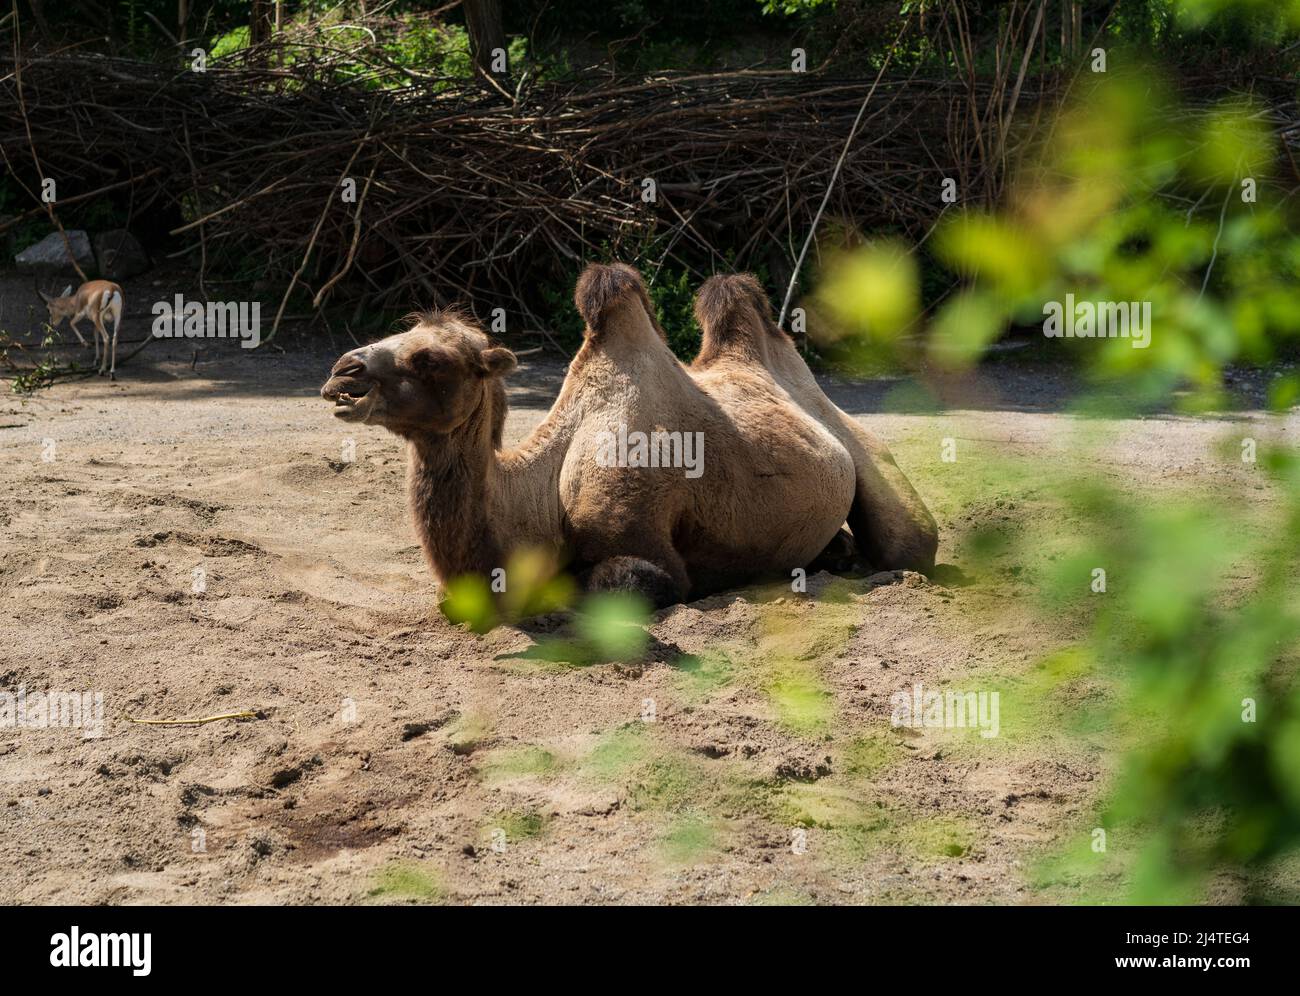 Camel laying in the zoo with green leaves in front Stock Photo